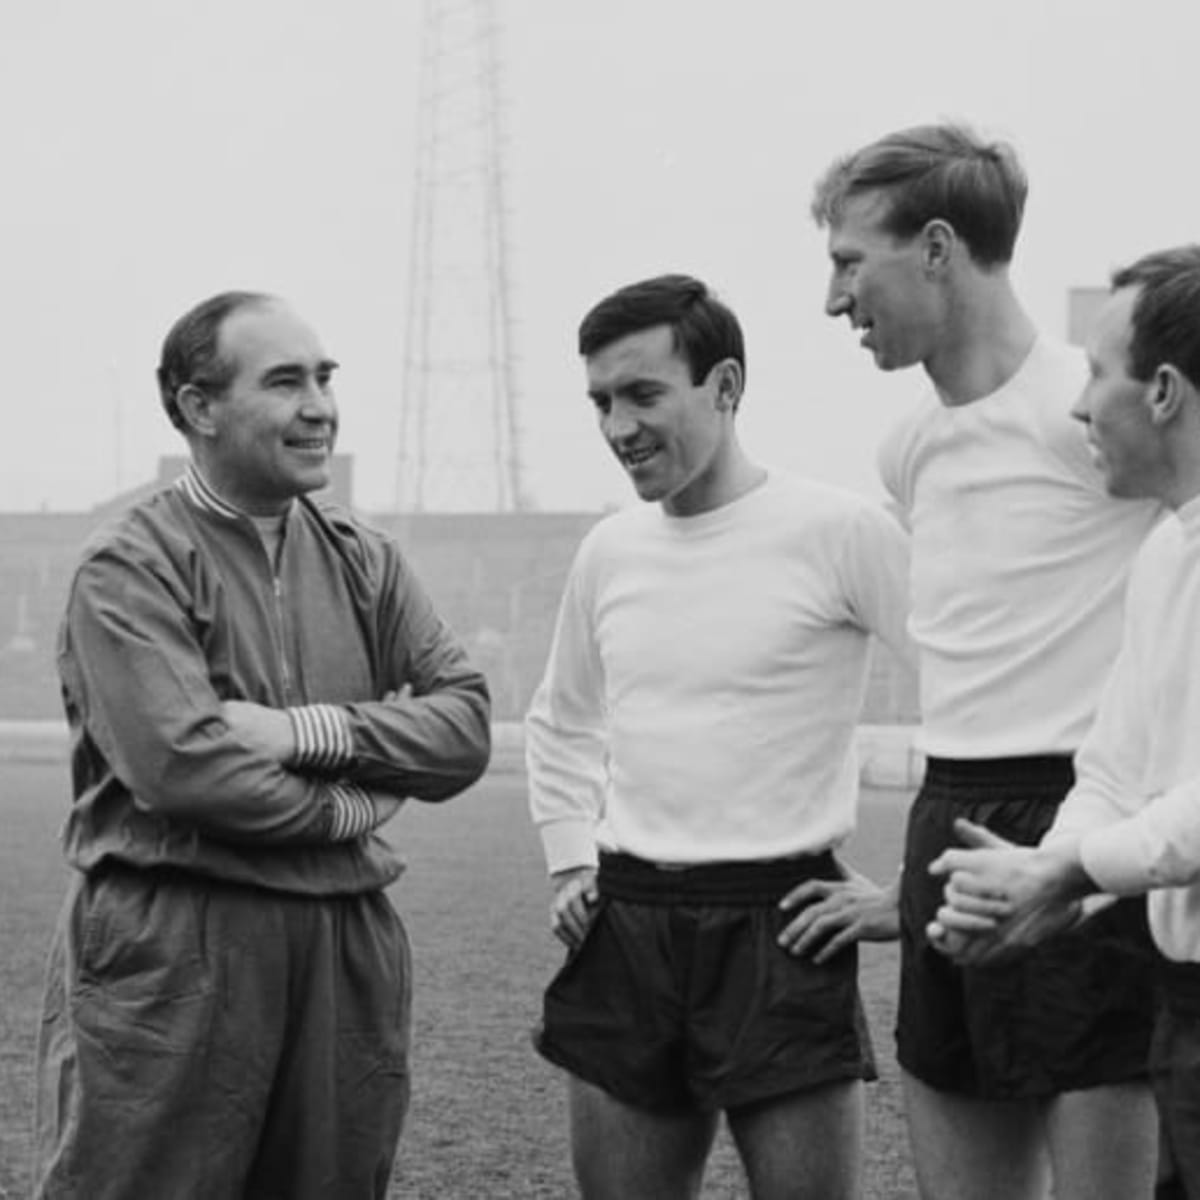 Sir Alf Ramsey: The Man Behind the 'Wingless Wonders' & England's Sole World Cup Triumph - Sports Illustrated